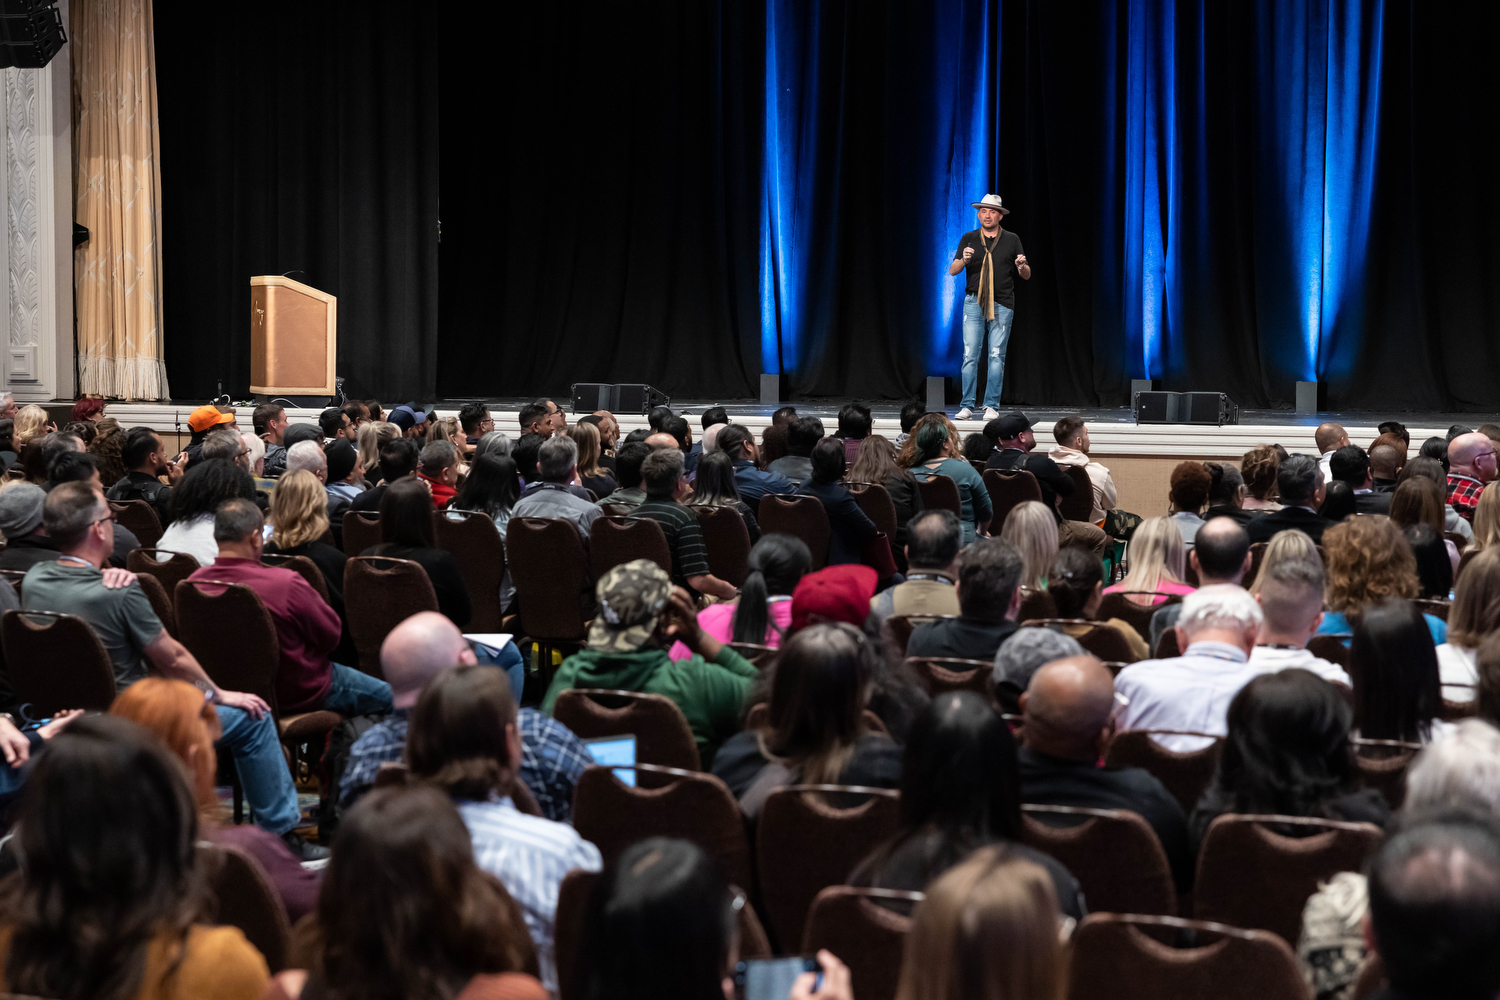 WPPI presented 63 seminars, which generated more than 94 hours of photographic education.